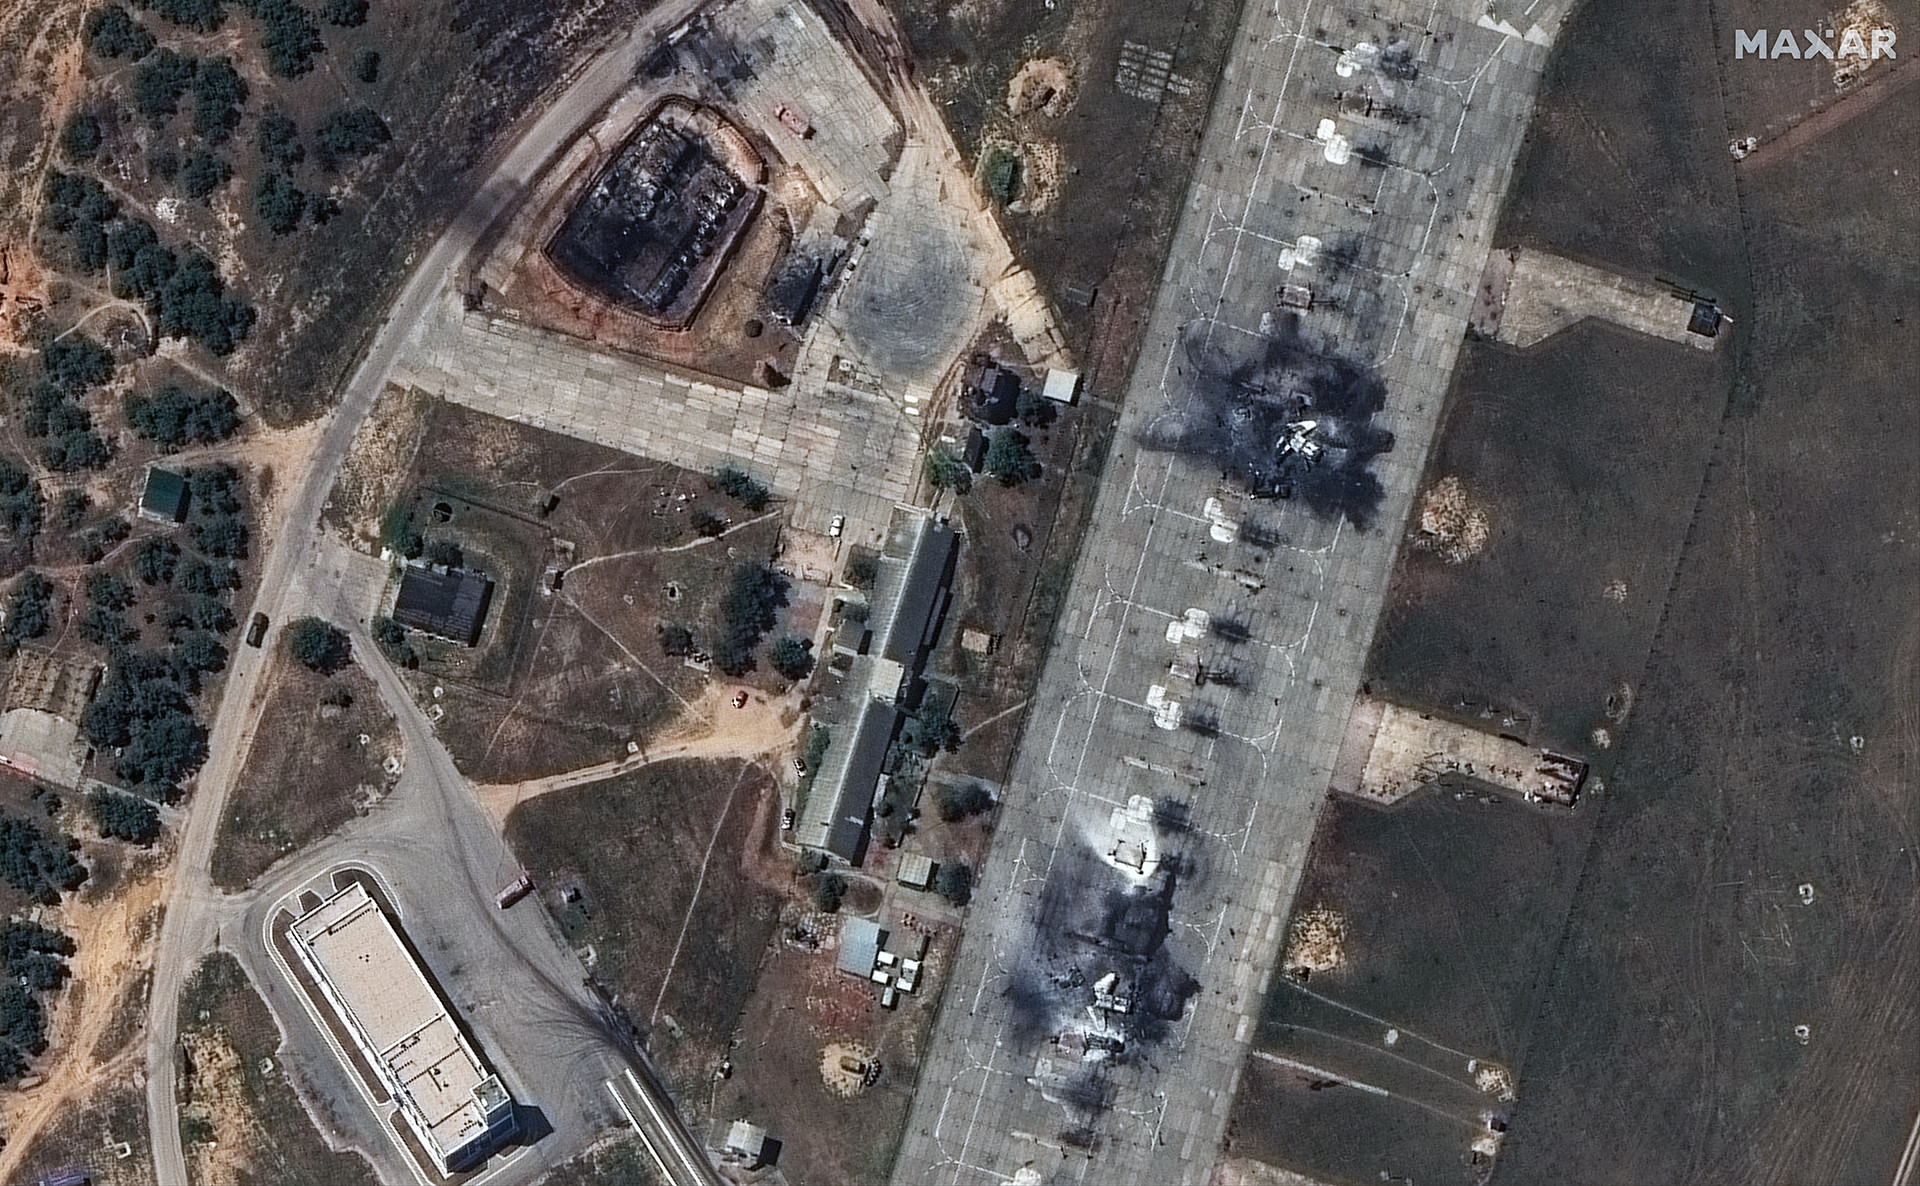 The War Zone has now obtained additional high-resolution imagery better showing the extent of the destruction at Russia's Belbek Air Base from recent Ukrainian strikes.